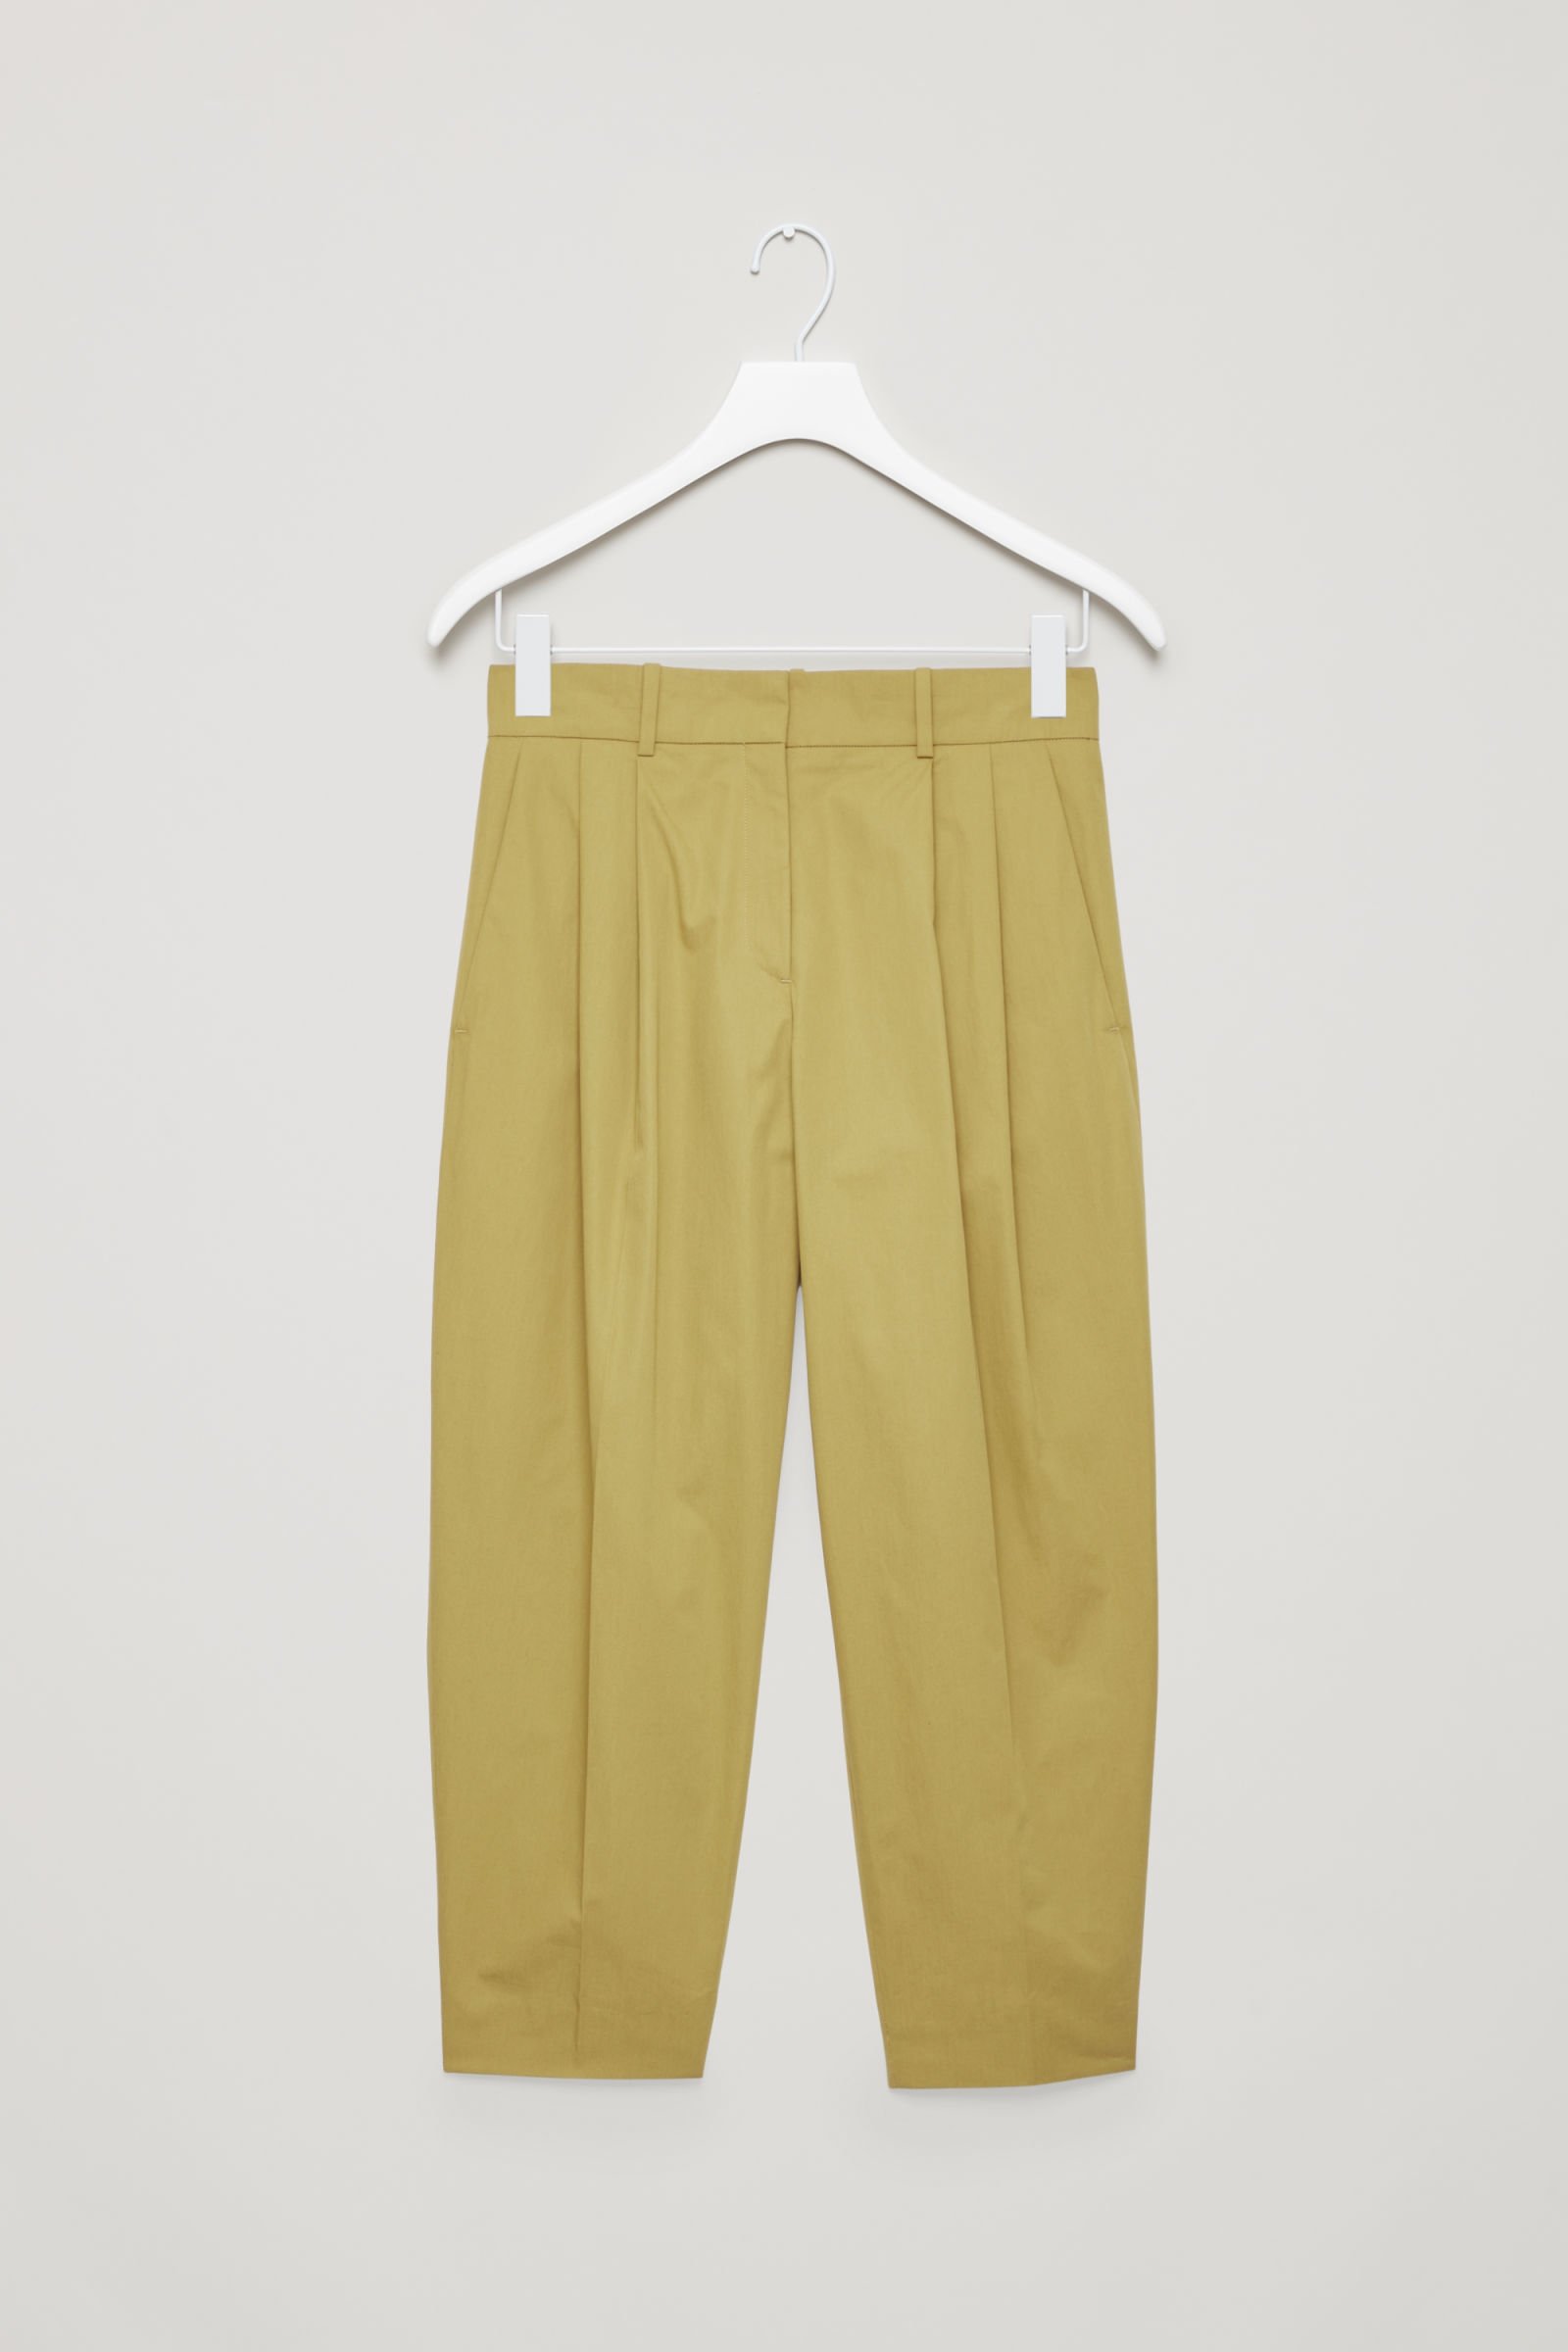 Reiss Shae Tapered Linen Trousers